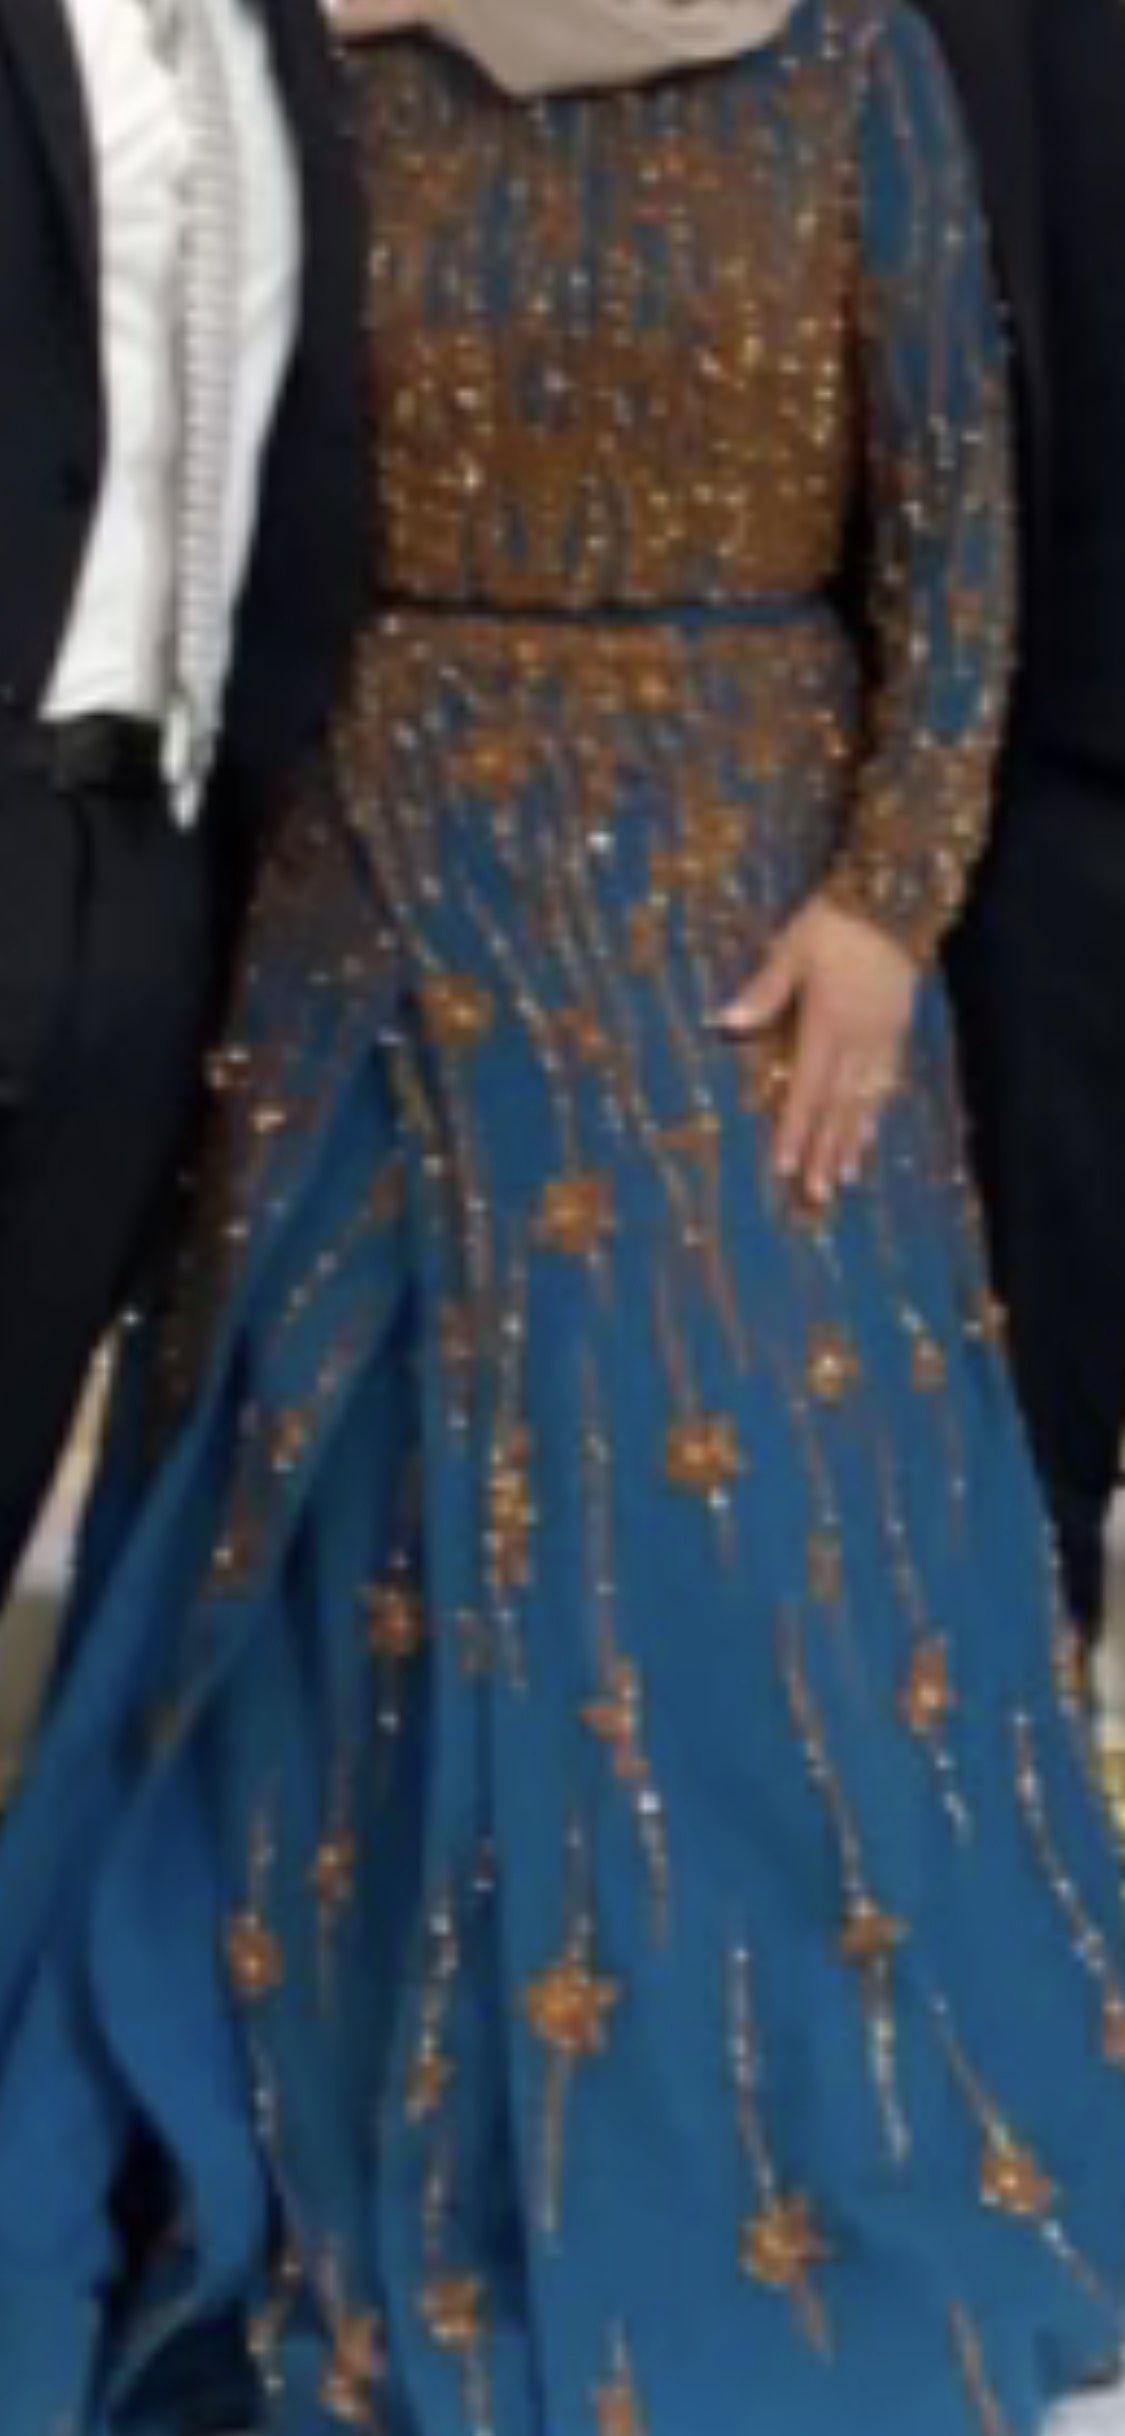 Style Custom made Ahmad issa couture Size 8 Wedding Guest Long Sleeve Sequined Blue A-line Dress on Queenly